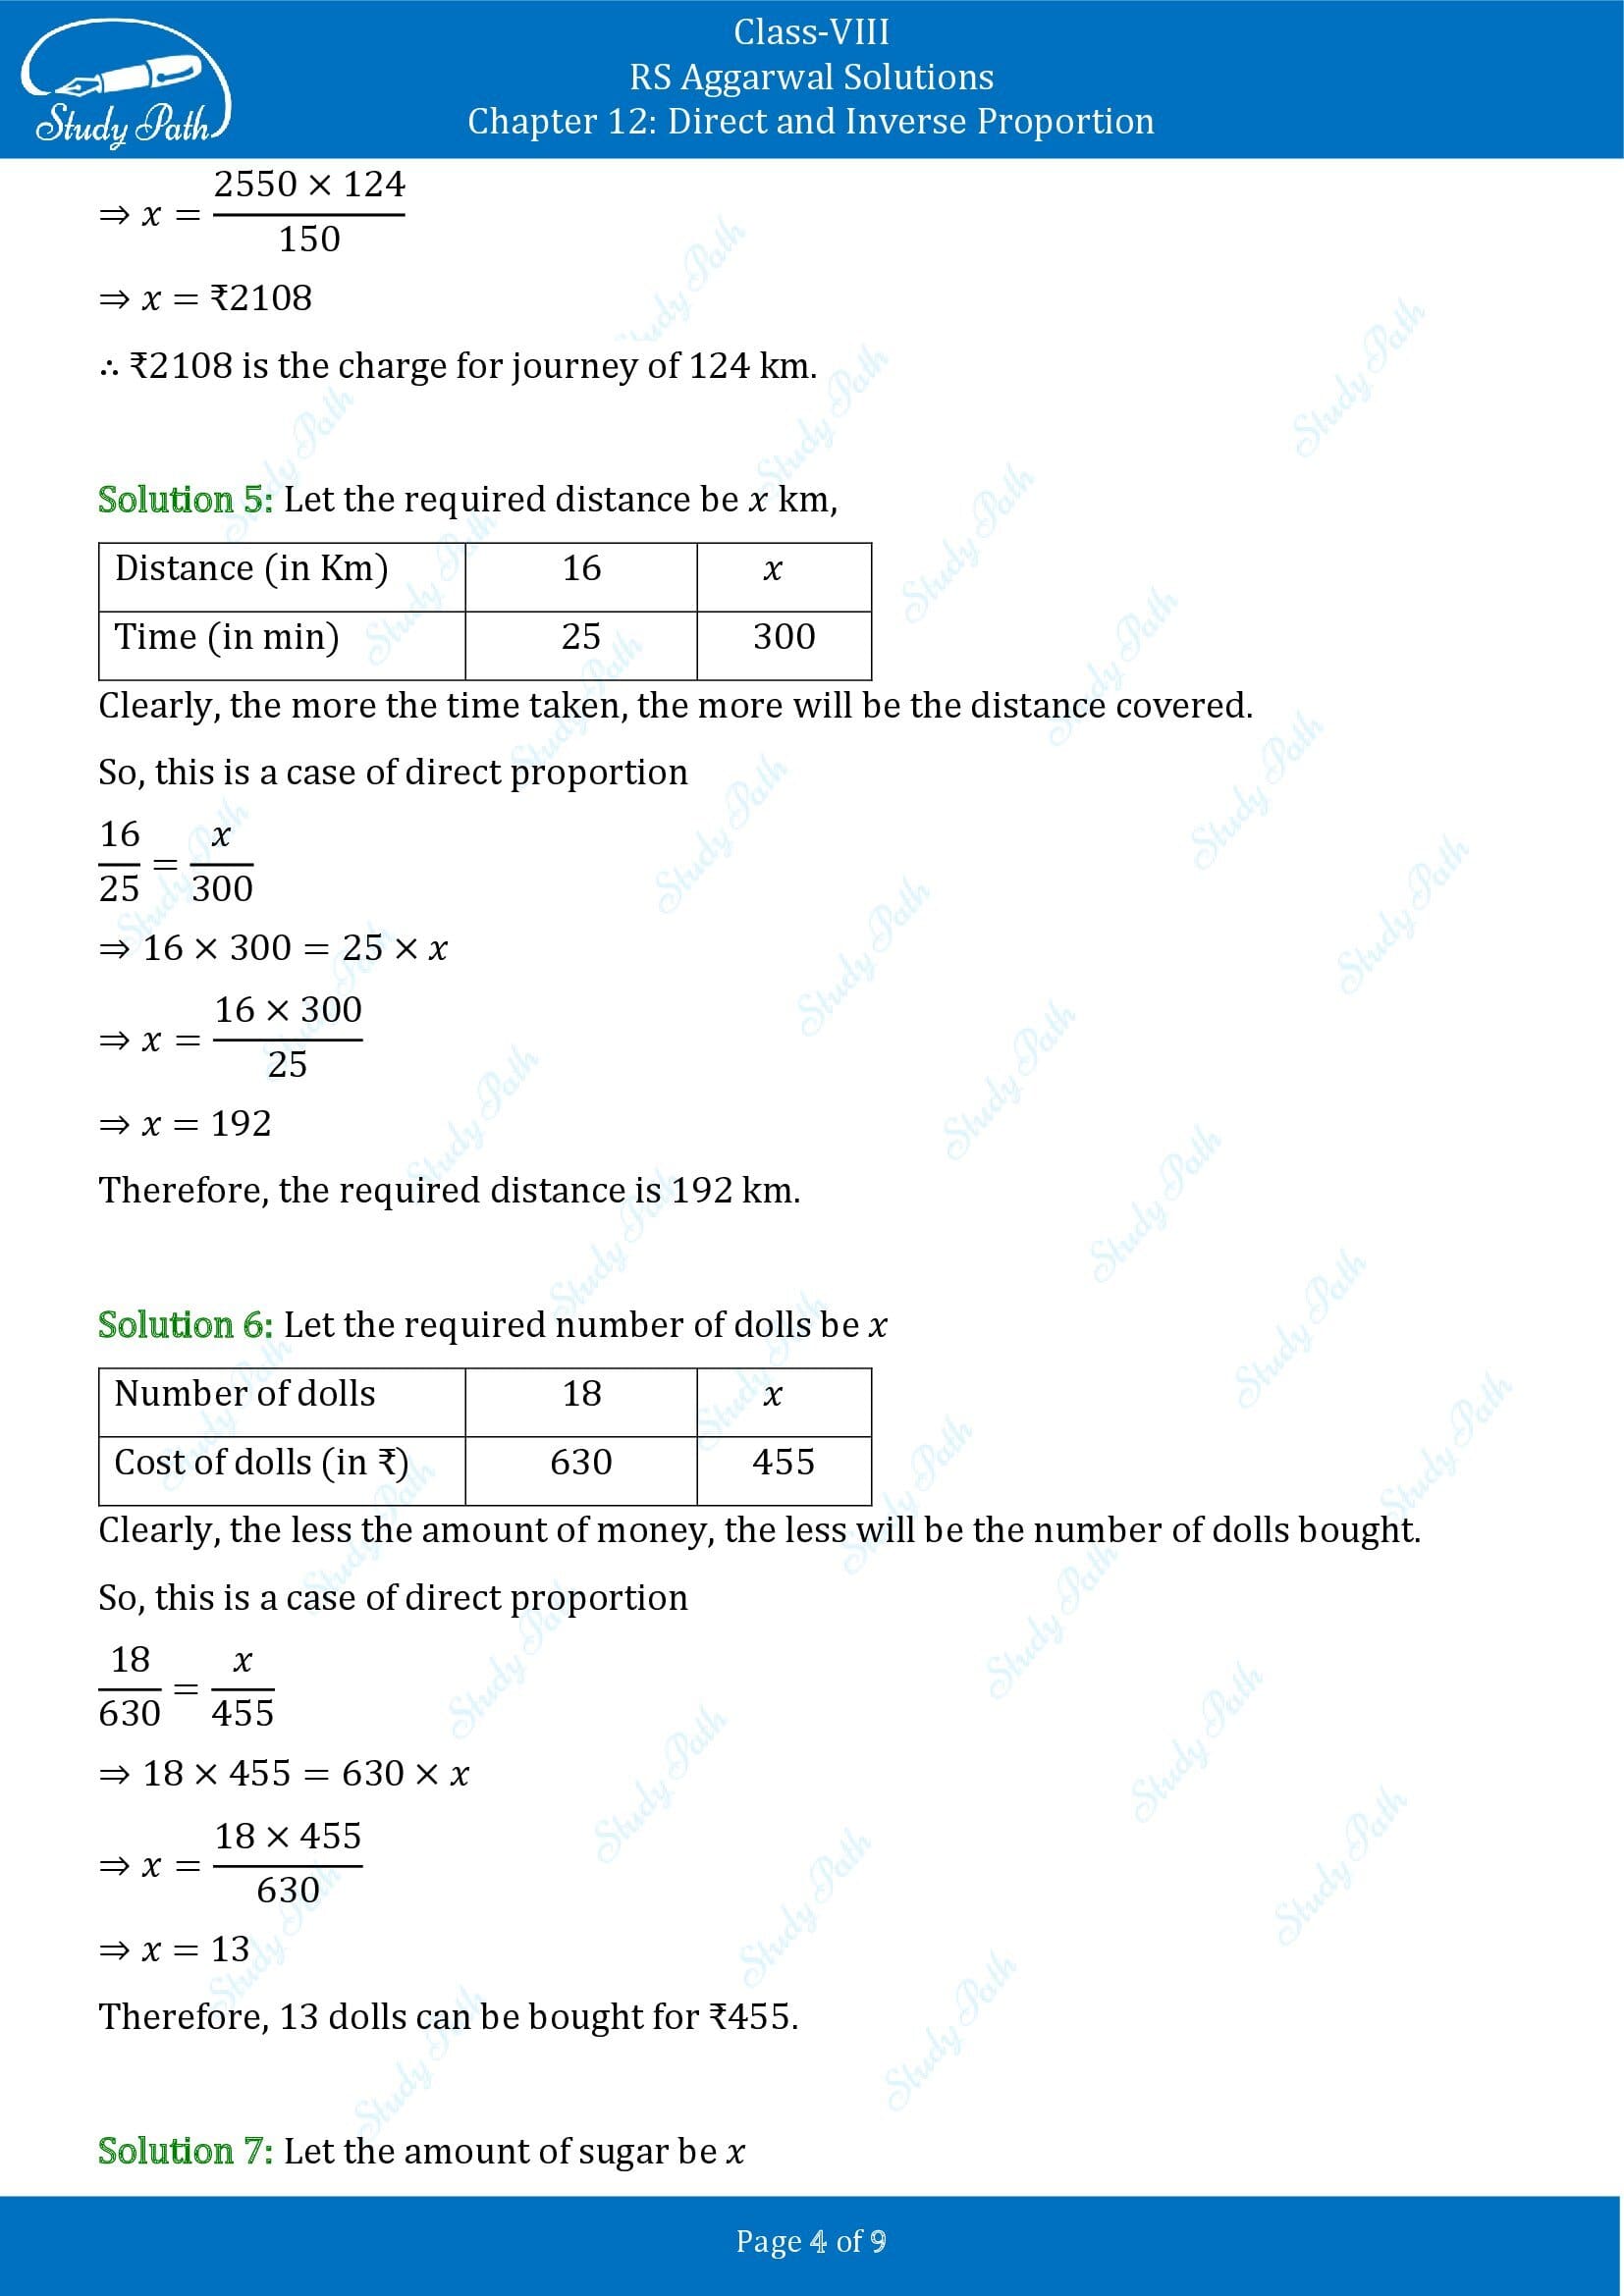 RS Aggarwal Solutions Class 8 Chapter 12 Direct and Inverse Proportion Exercise 12A 00004